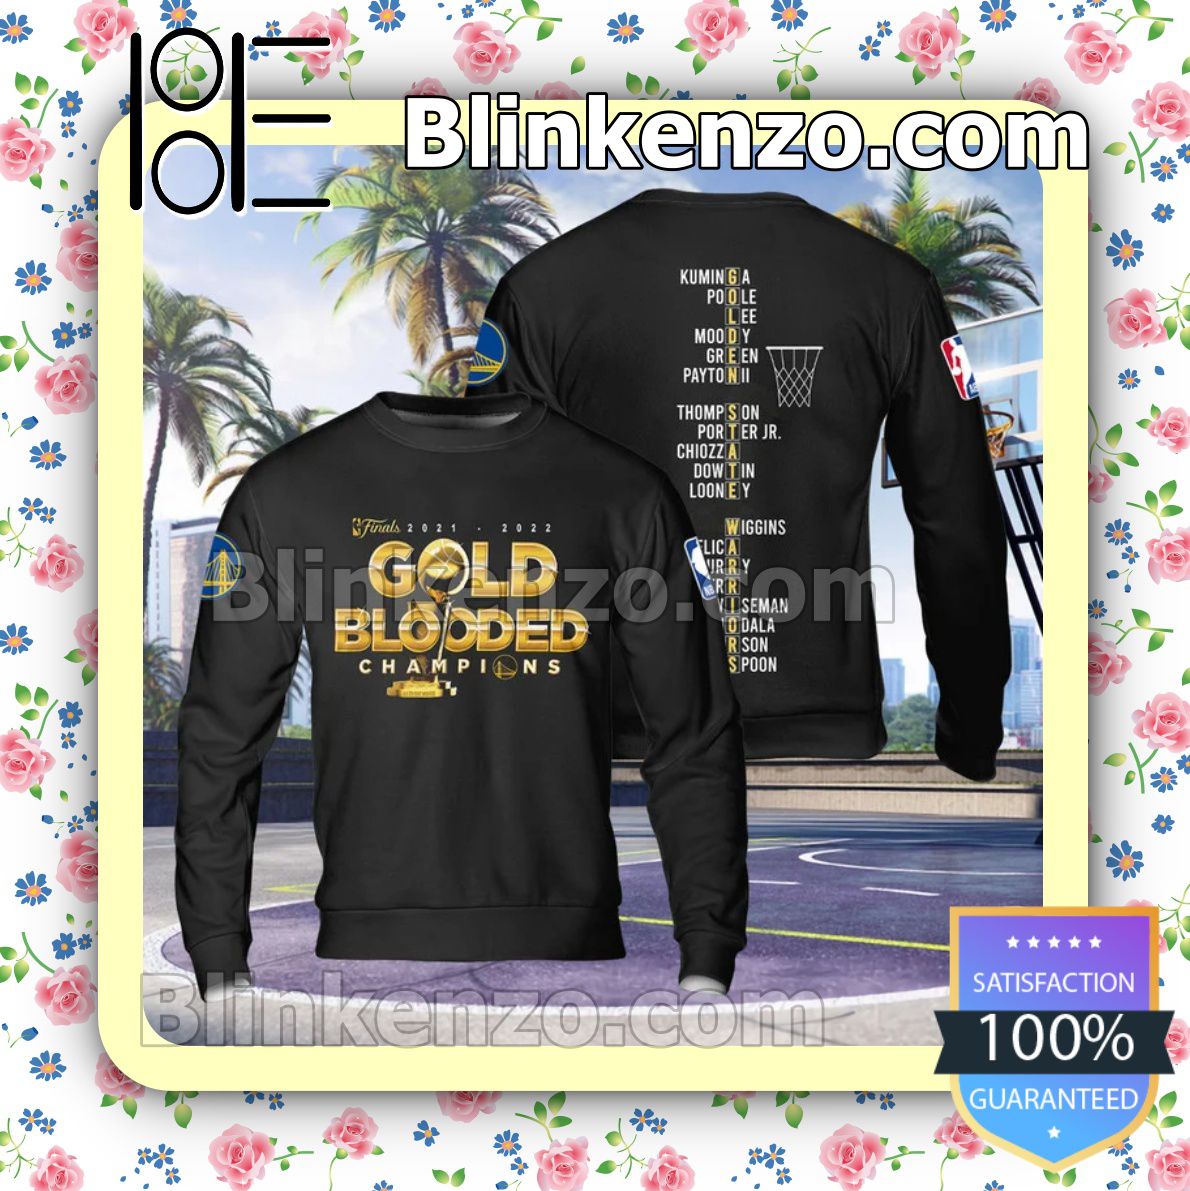 eBay Finals 2021-2022 Gold Blooded Champions Hoodies, Long Sleeve Shirt